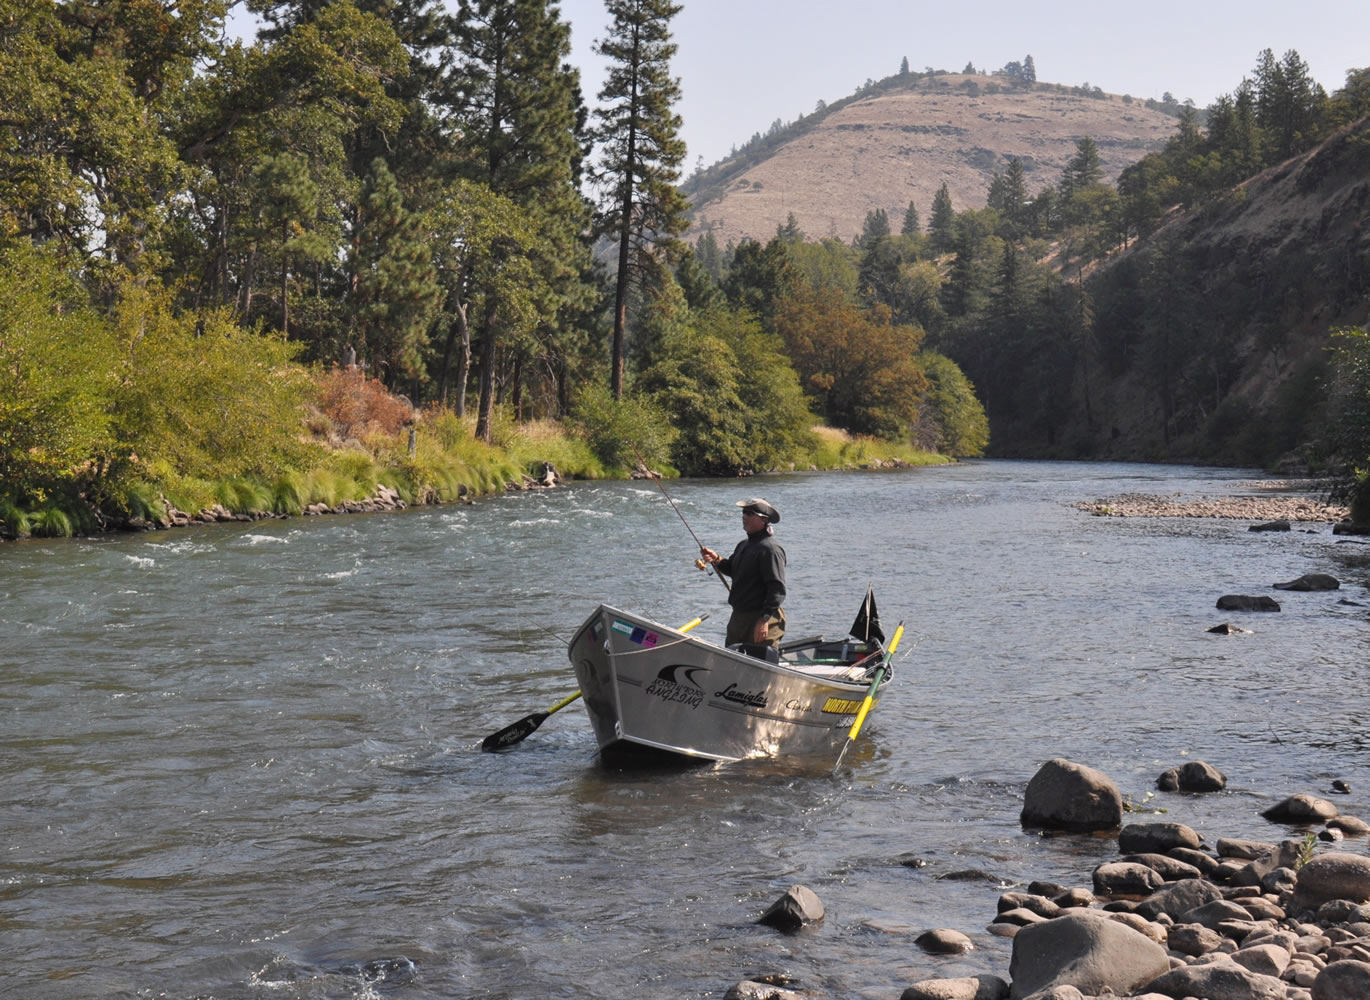 Vince Froehlich says the Klickitat River has great fishing for steelhead and salmon, but a guide needs more than one river to survive.